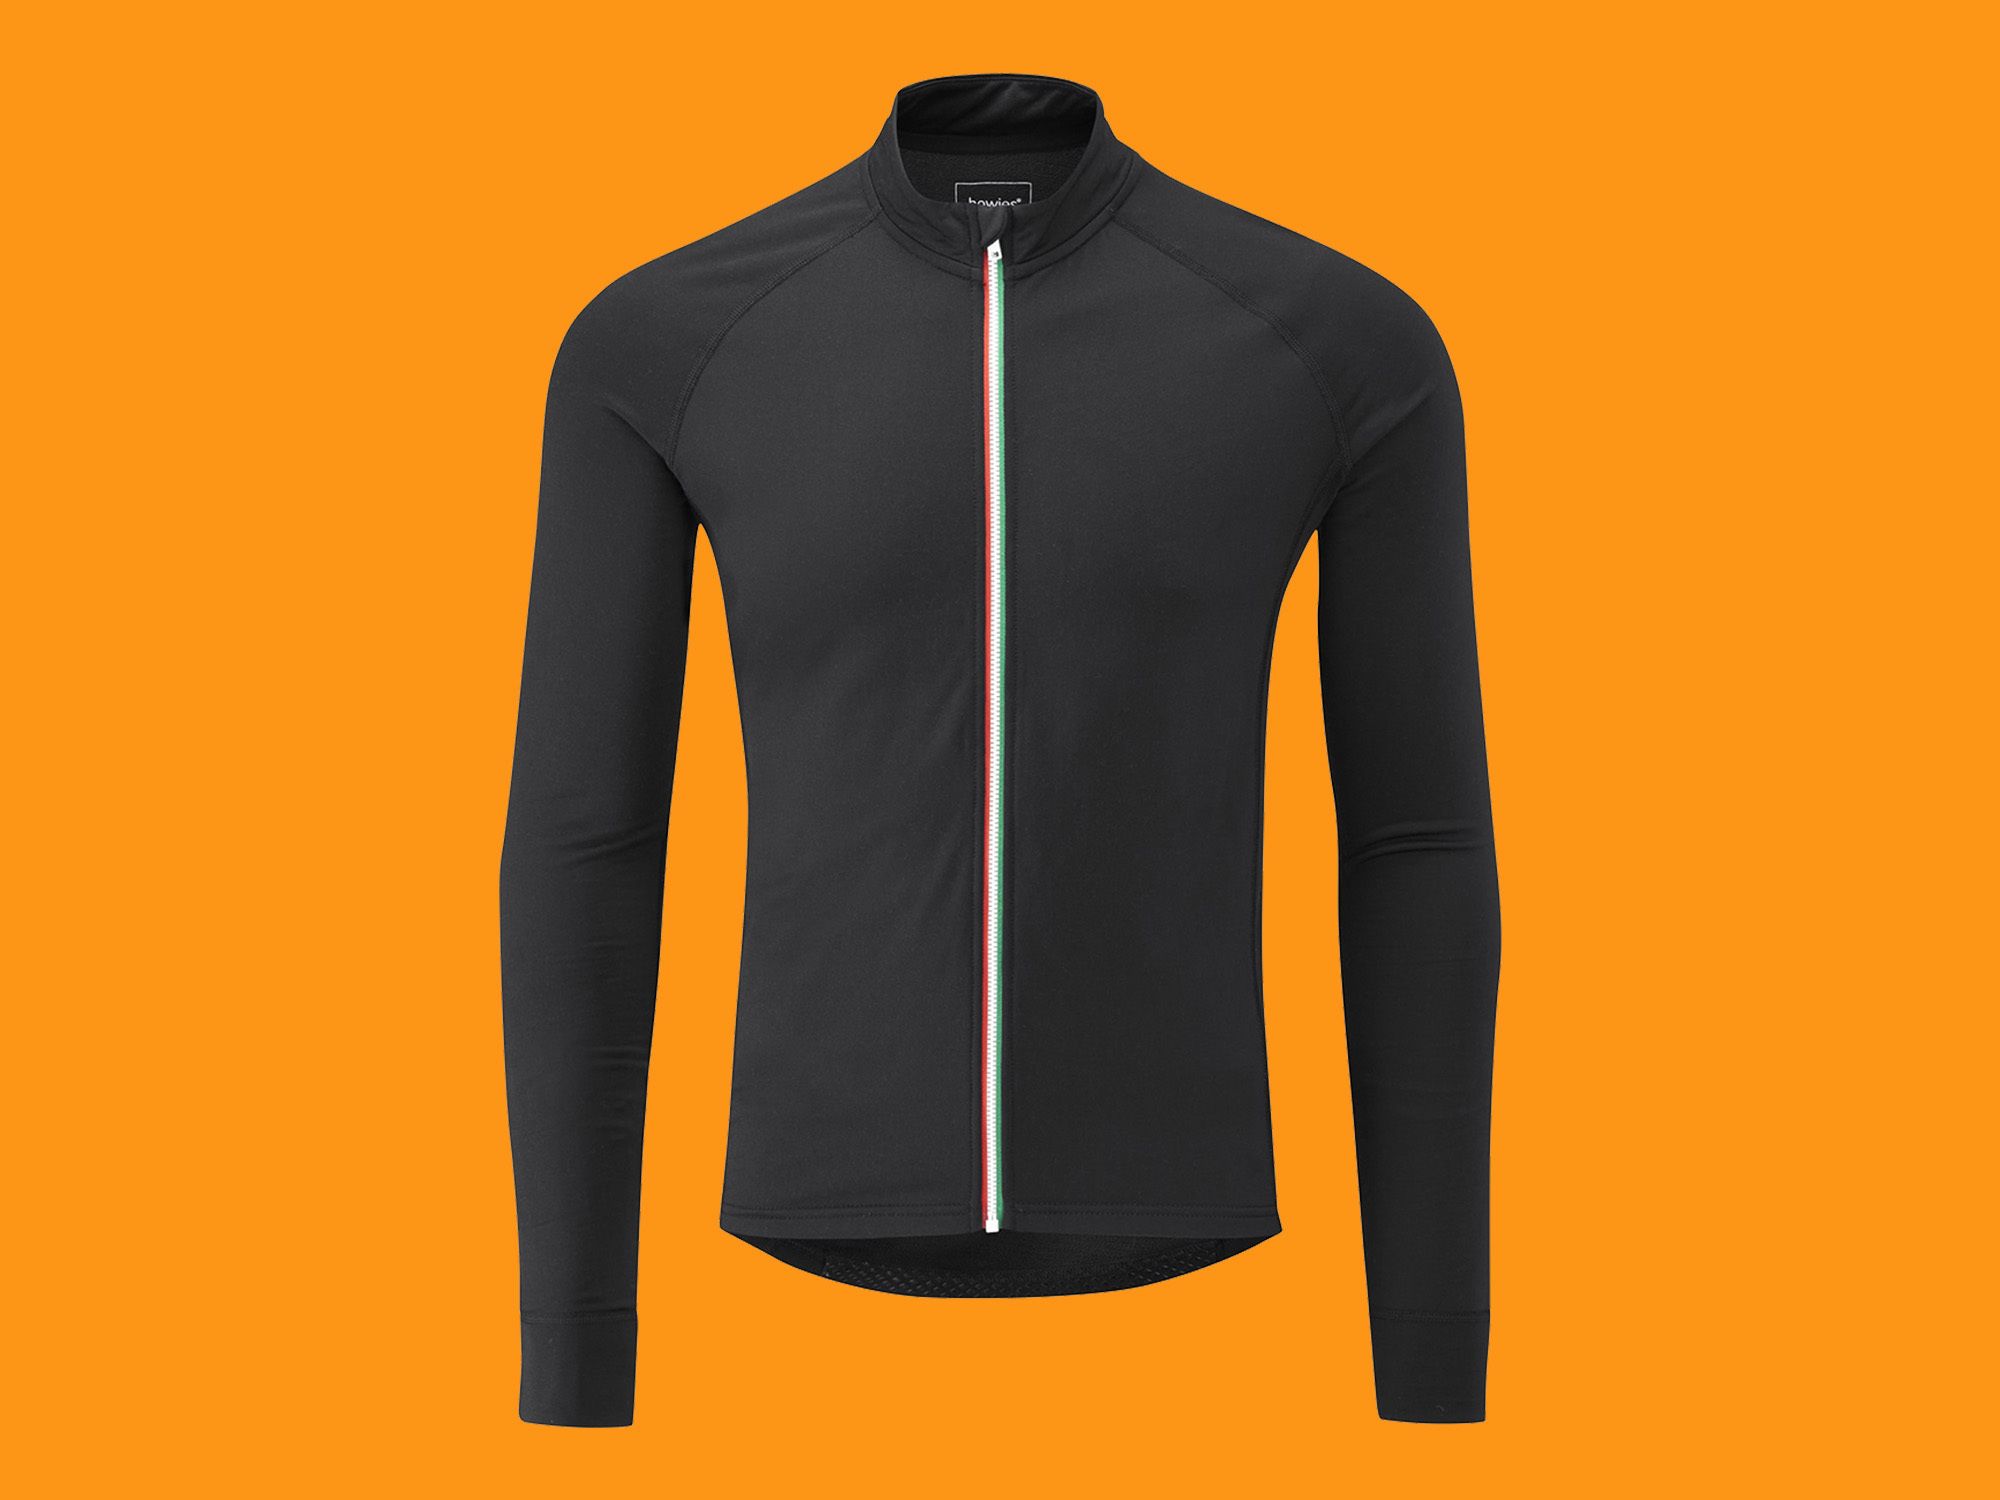 howies cycle clothing